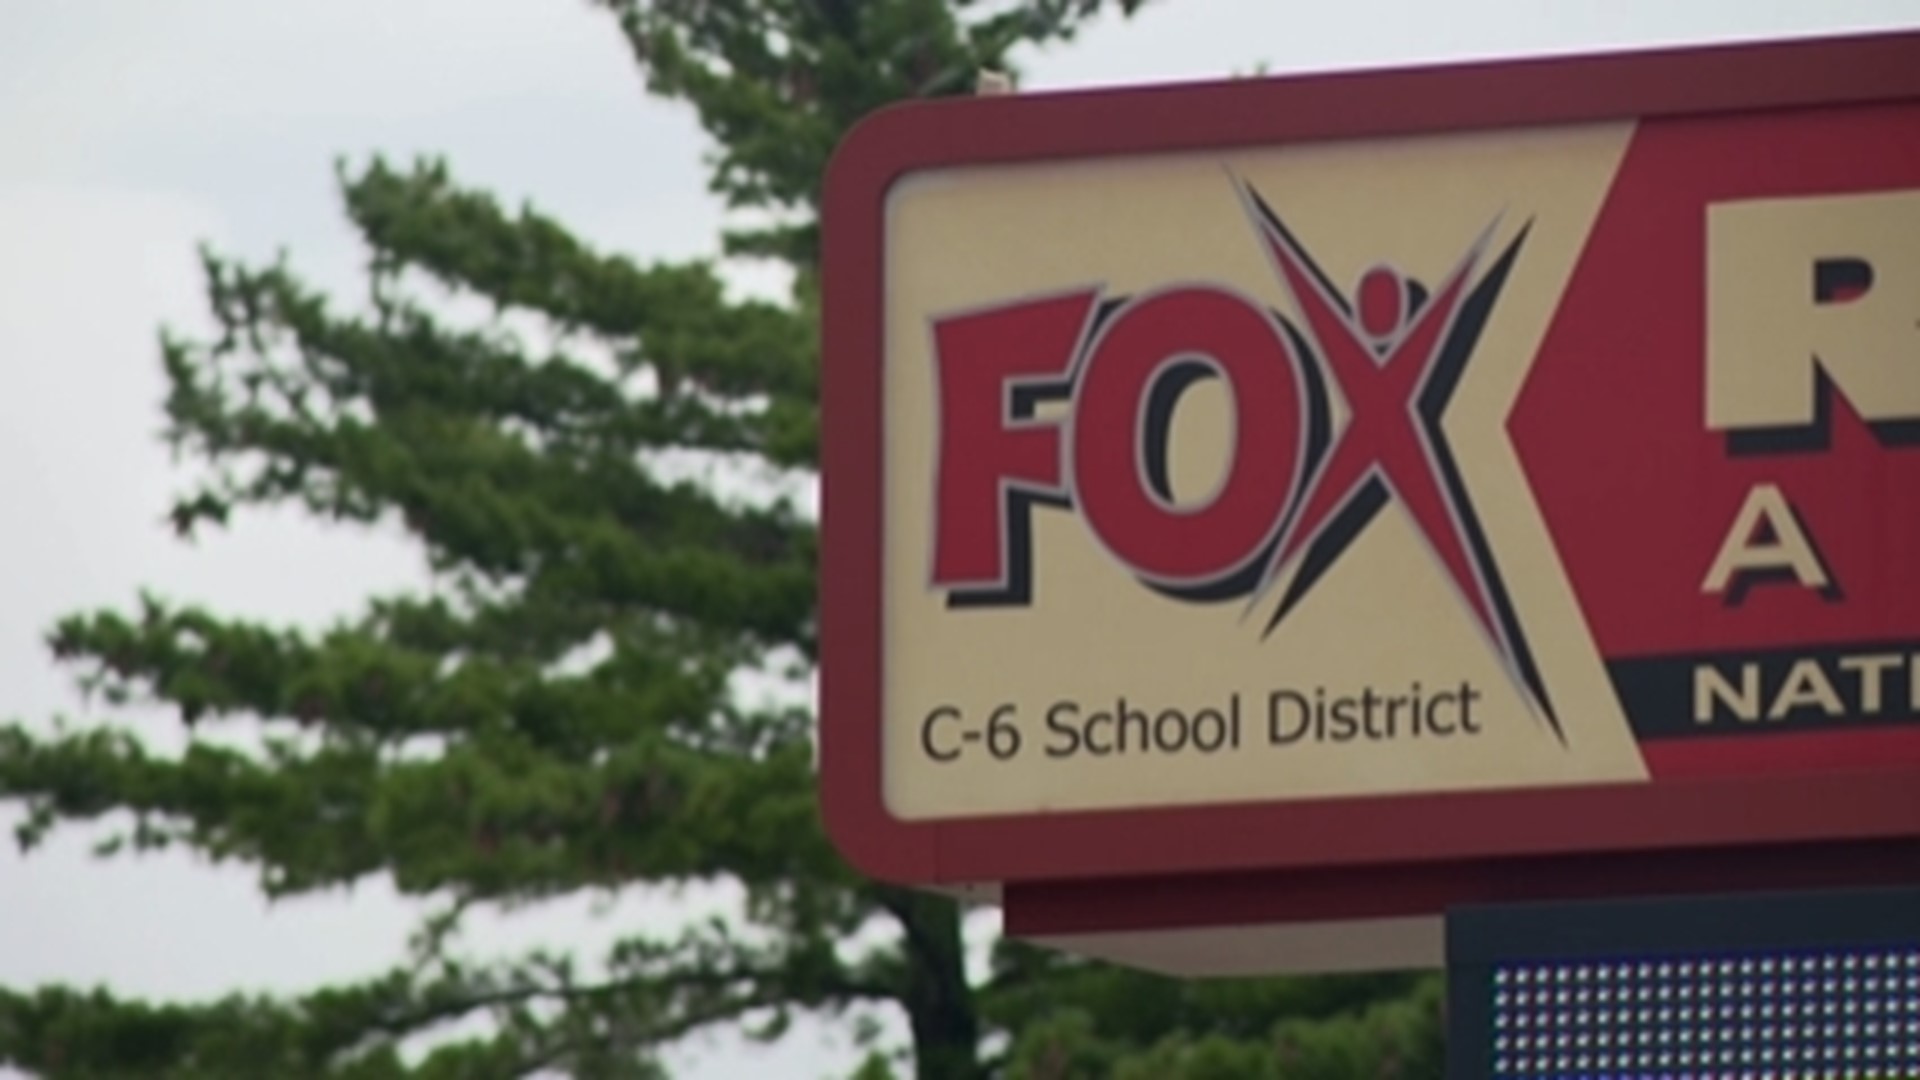 If it was approved, then it would have been the first tax levy for the school district in nearly 20 years.